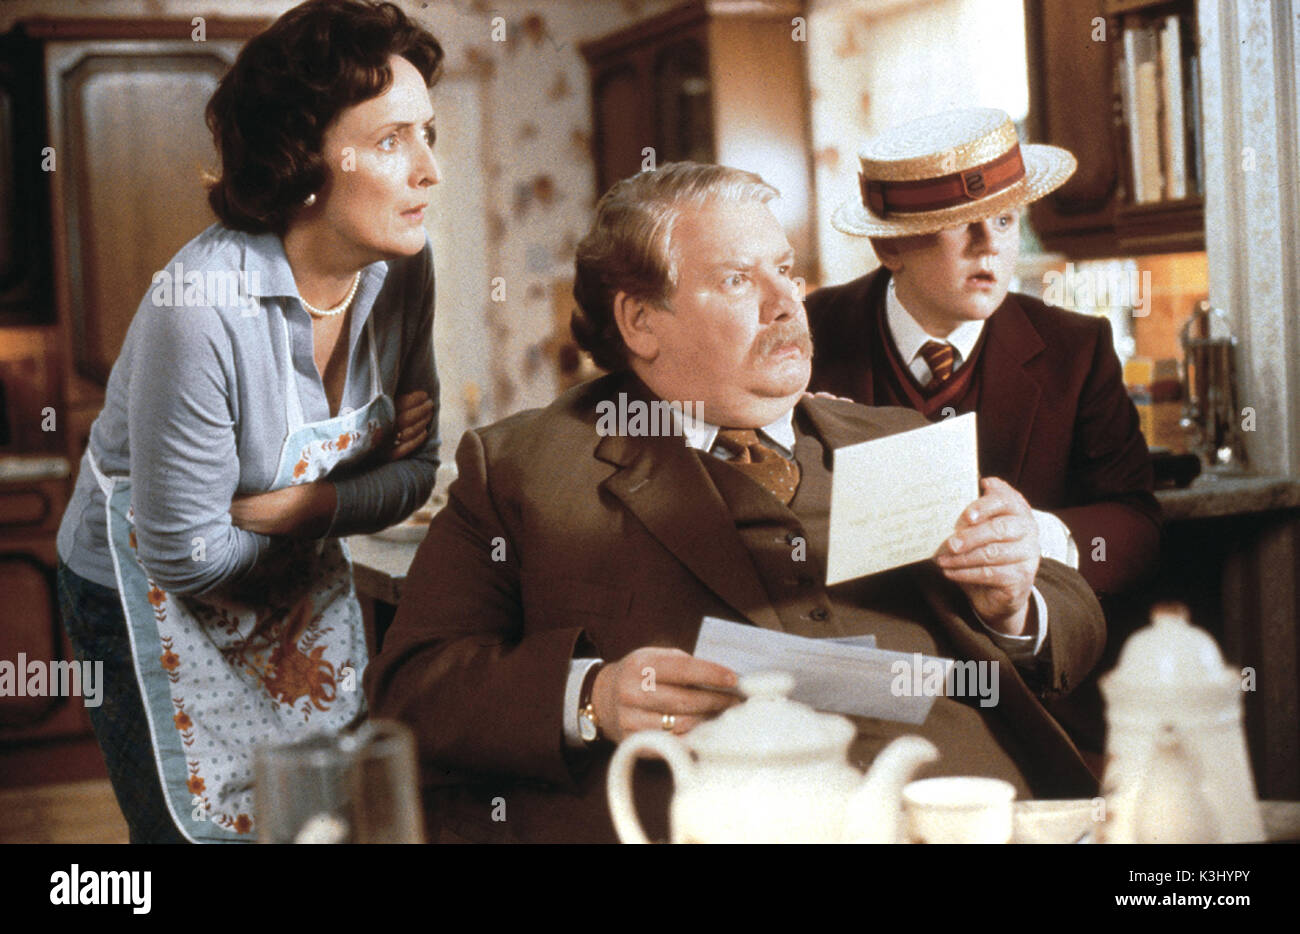 Vernon Dursley High Resolution Stock Photography and Images - Alamy